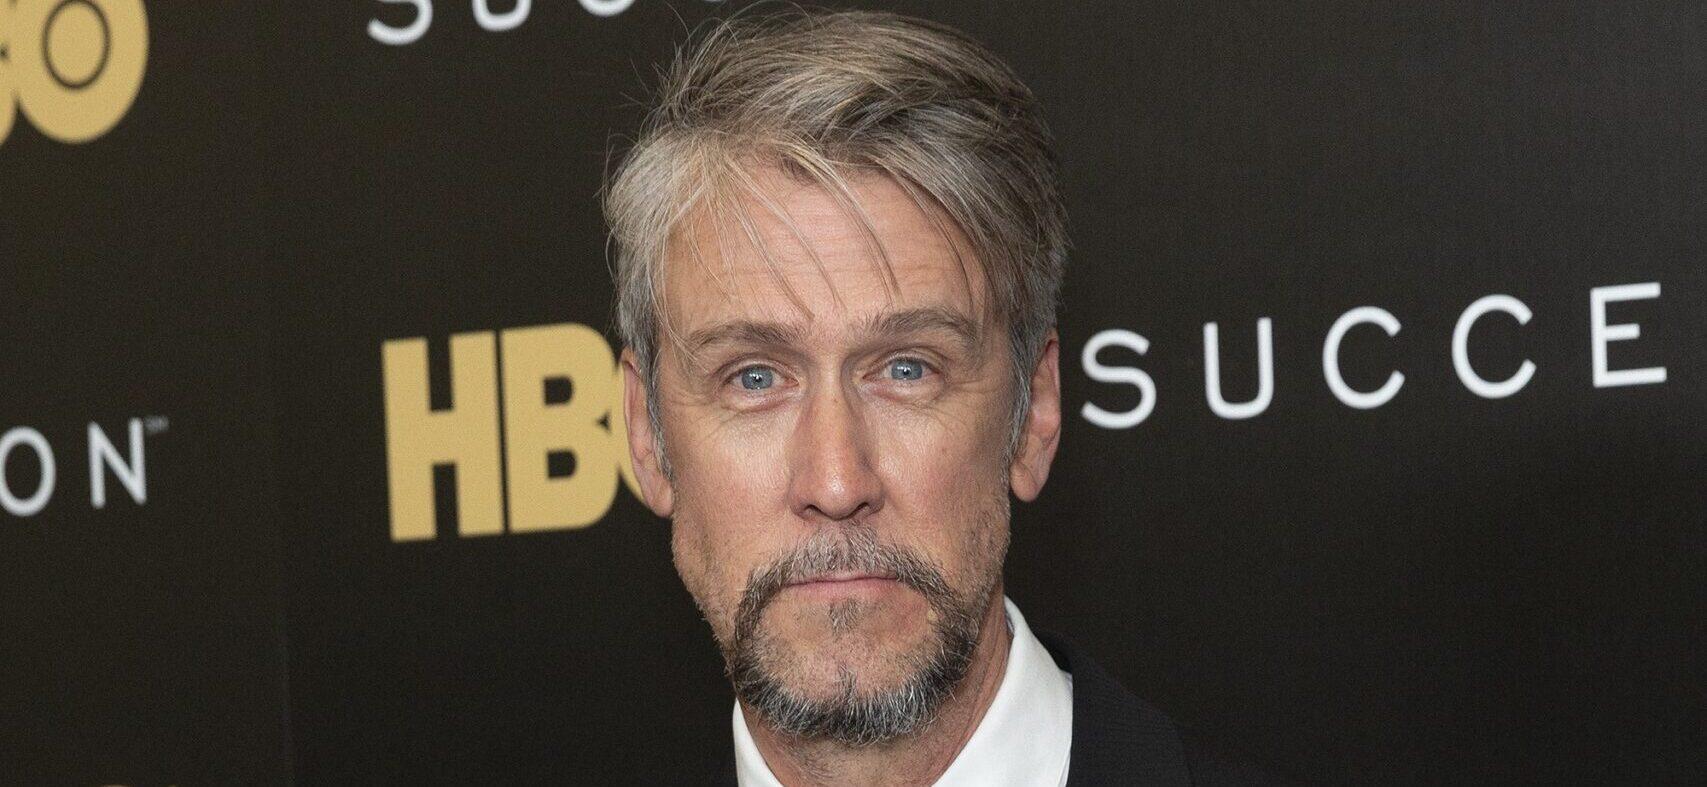 ‘Succession’ Star Alan Ruck Sued Over Car Crash Leaving Victim With ‘Severe’ Injuries